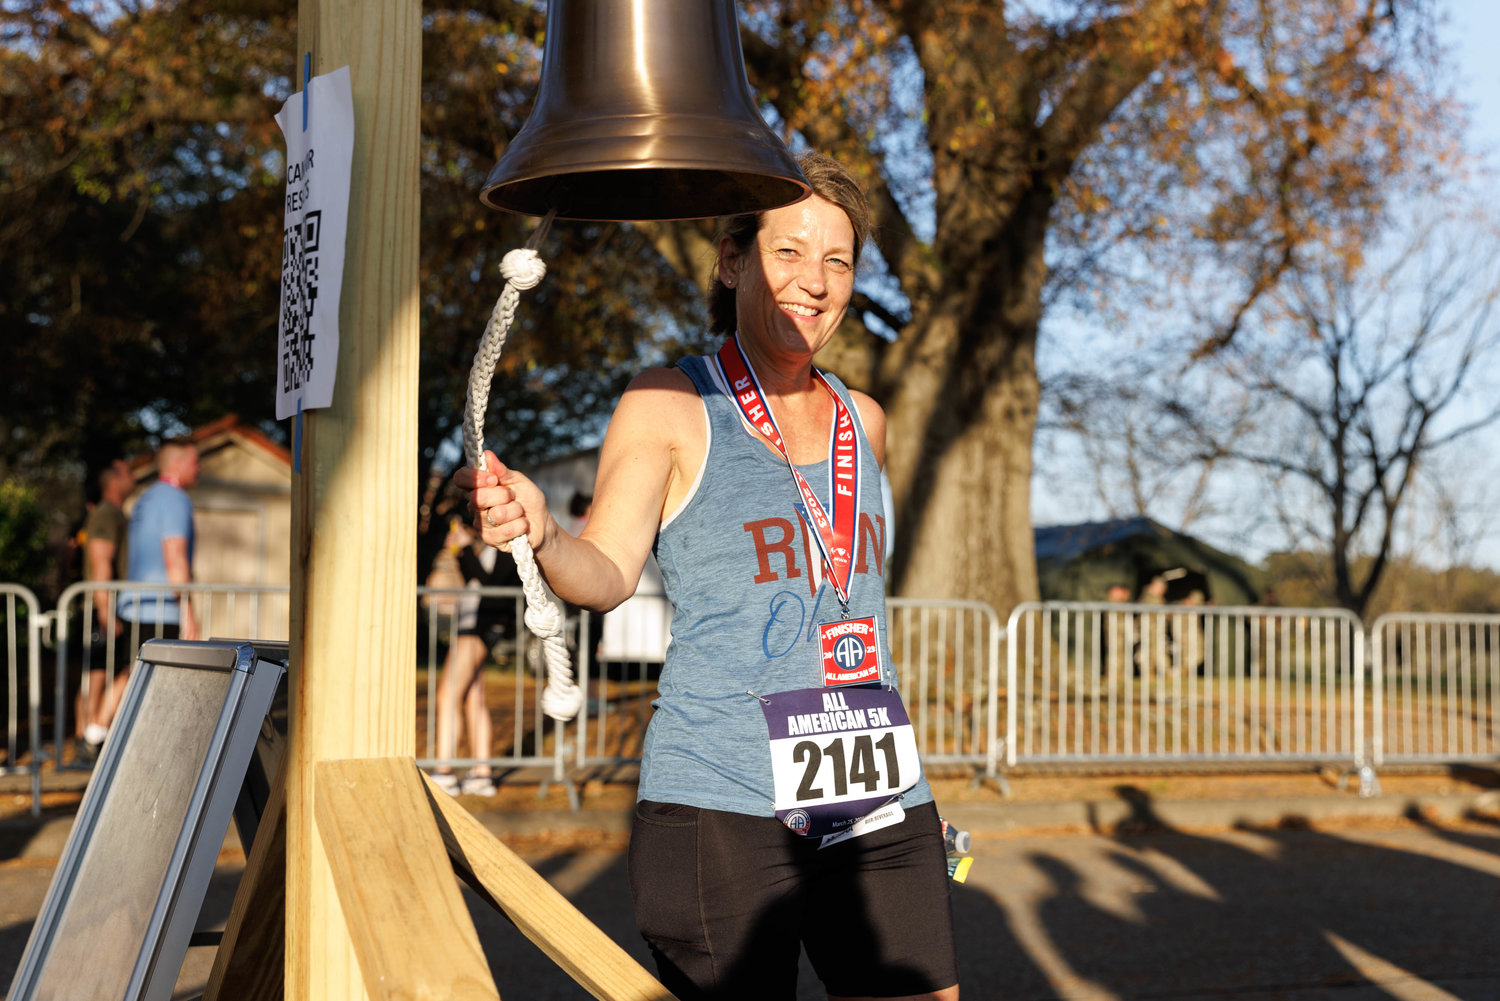 Jennifer Deskins rings the bell after completing the All American Race on Fort Bragg on March 23, 2023.  Tony Wooten/CityView Media